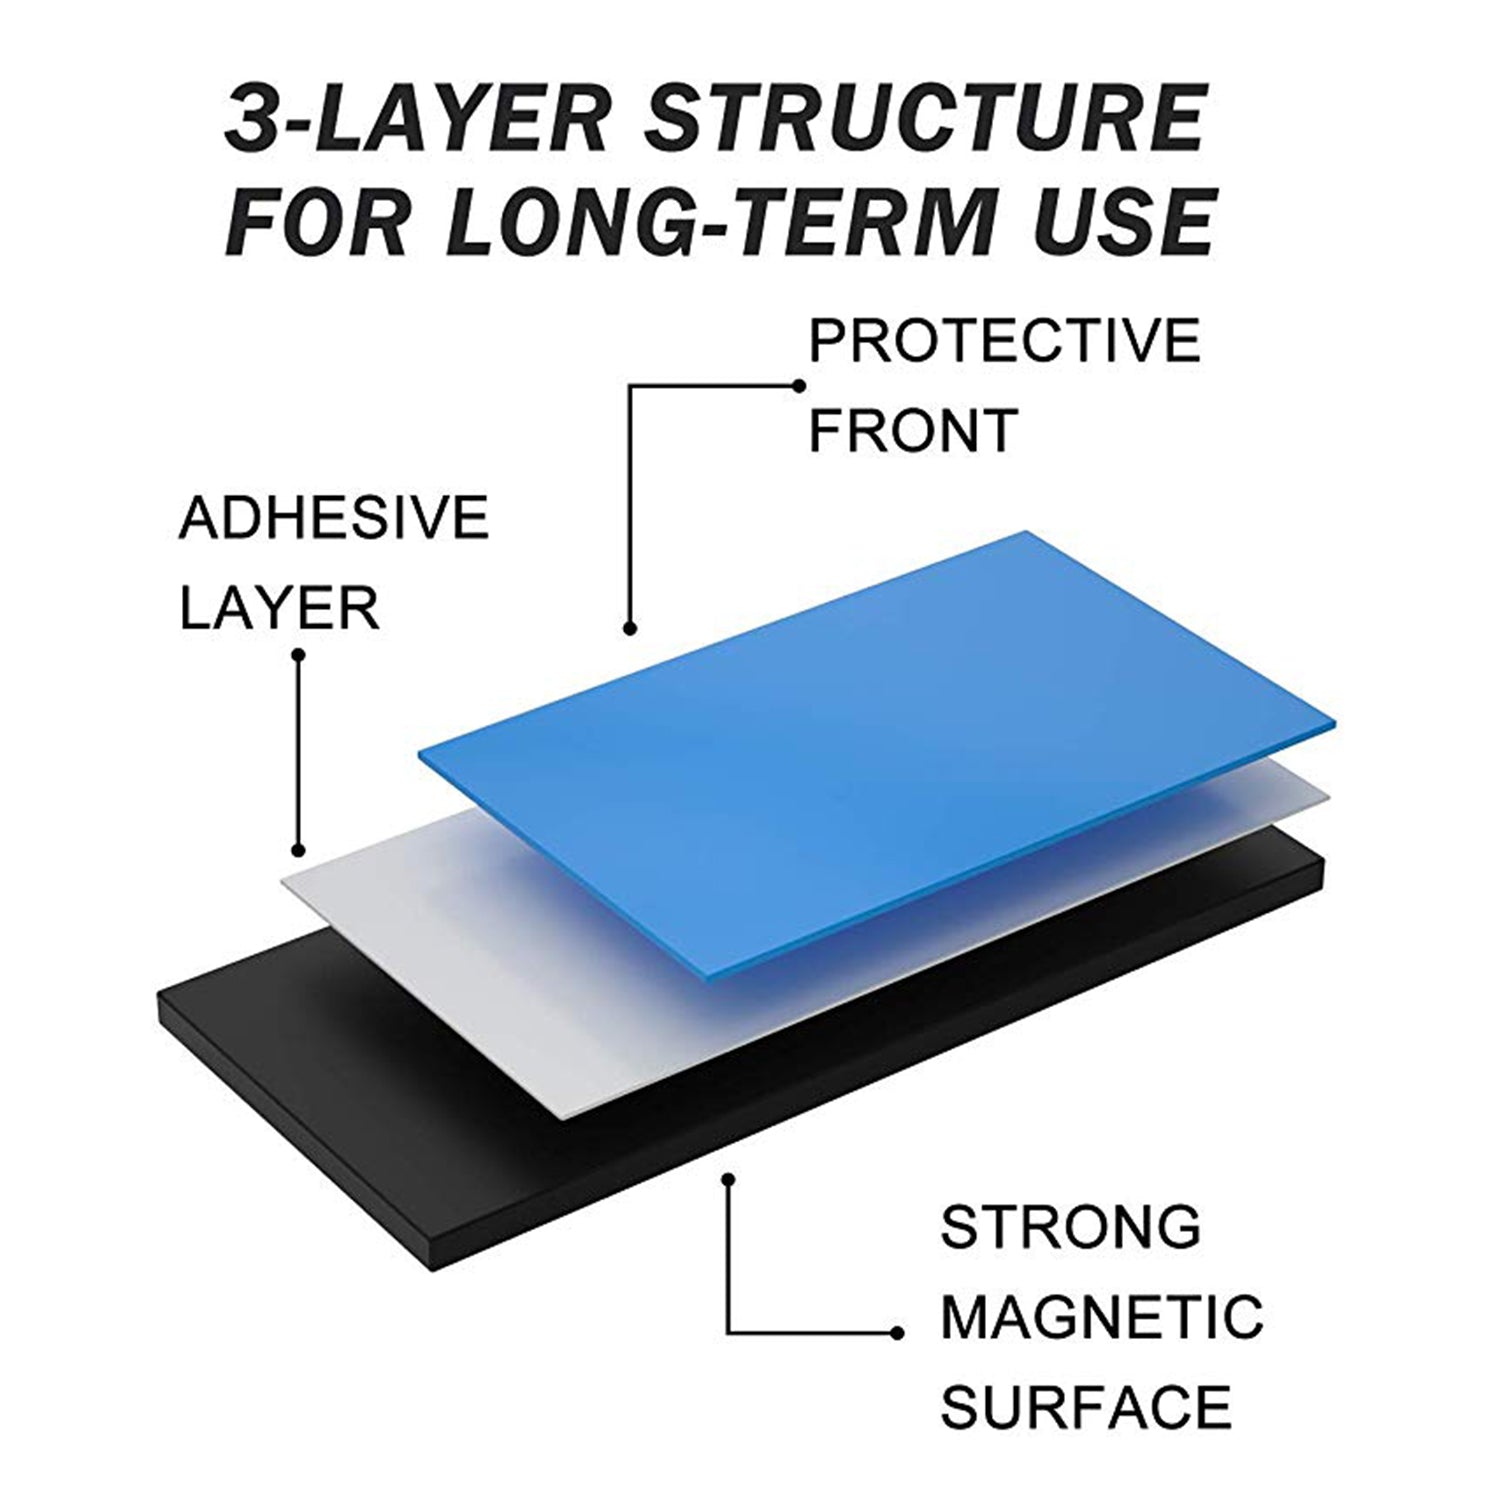 Magnetic Sheets With Adhesive Backing Flexible Magnetic - Temu